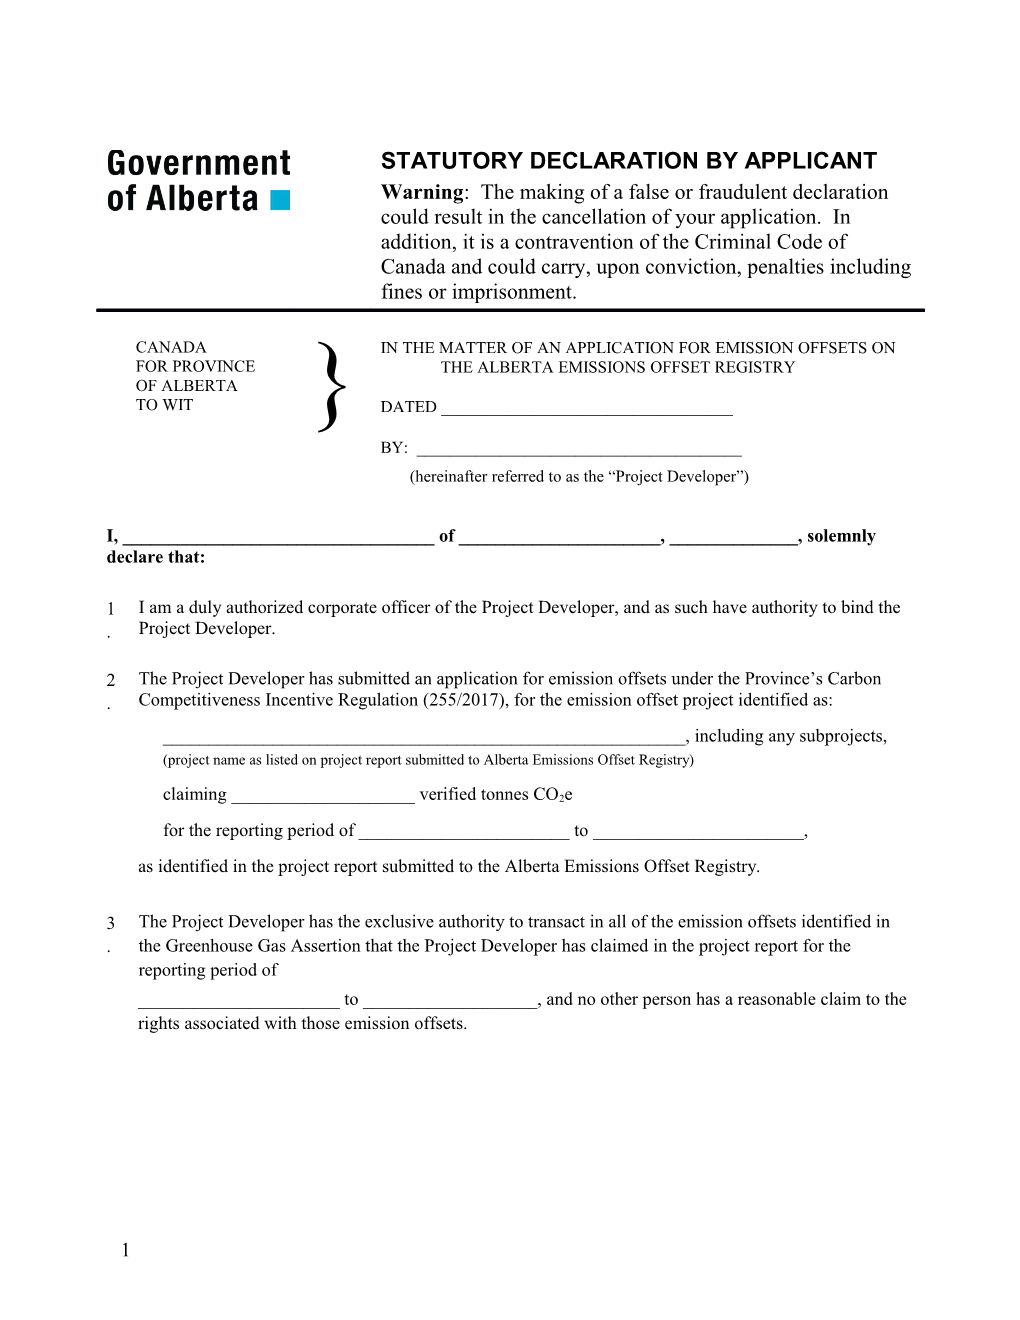 In the Matter of an Application for Emission Offsets on the Alberta Emissions Offset Registry